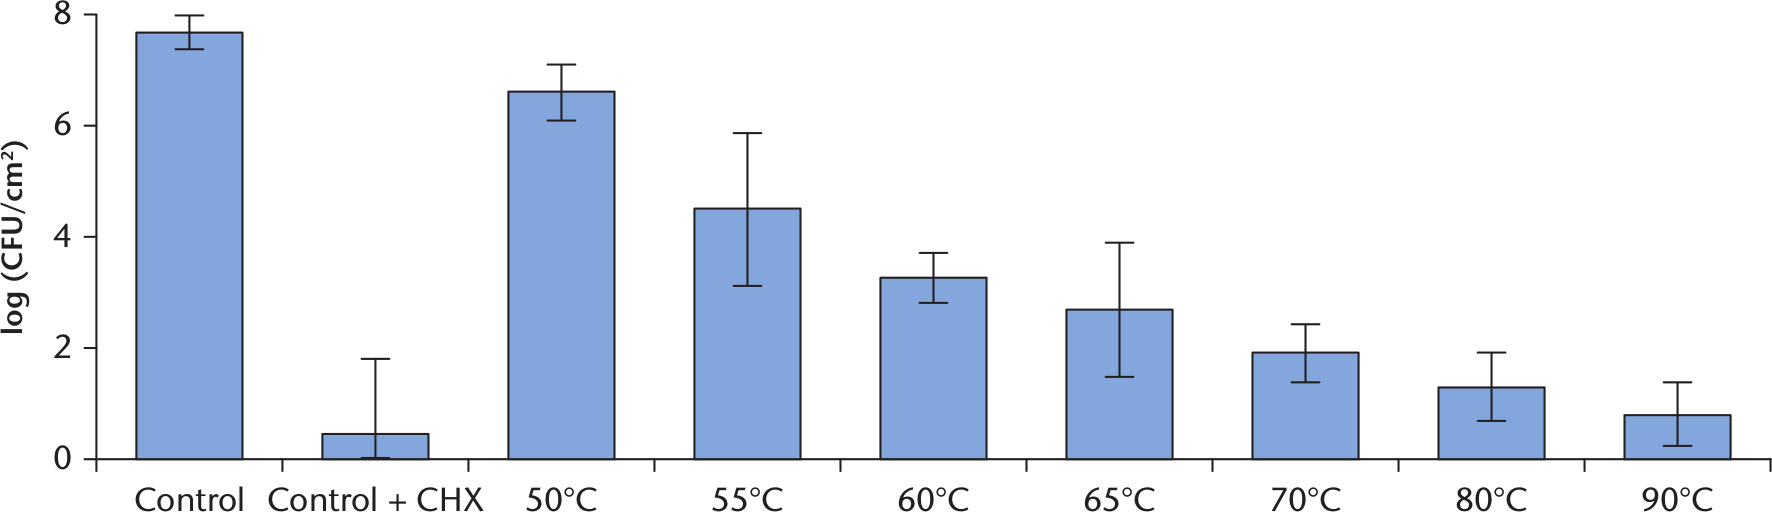 Fig. 2 
            Graph showing the relationship between temperature exposure and log colony forming units (CFUs) per cm2 for 24 hour Staphylococcus epidermidis biofilms. The bacteria were exposed to the target temperature for 3.5 minutes. Data are presented as means and corresponding 95% confidence intervals of at least five experiments per group. CHX, chlorhexidine.
          